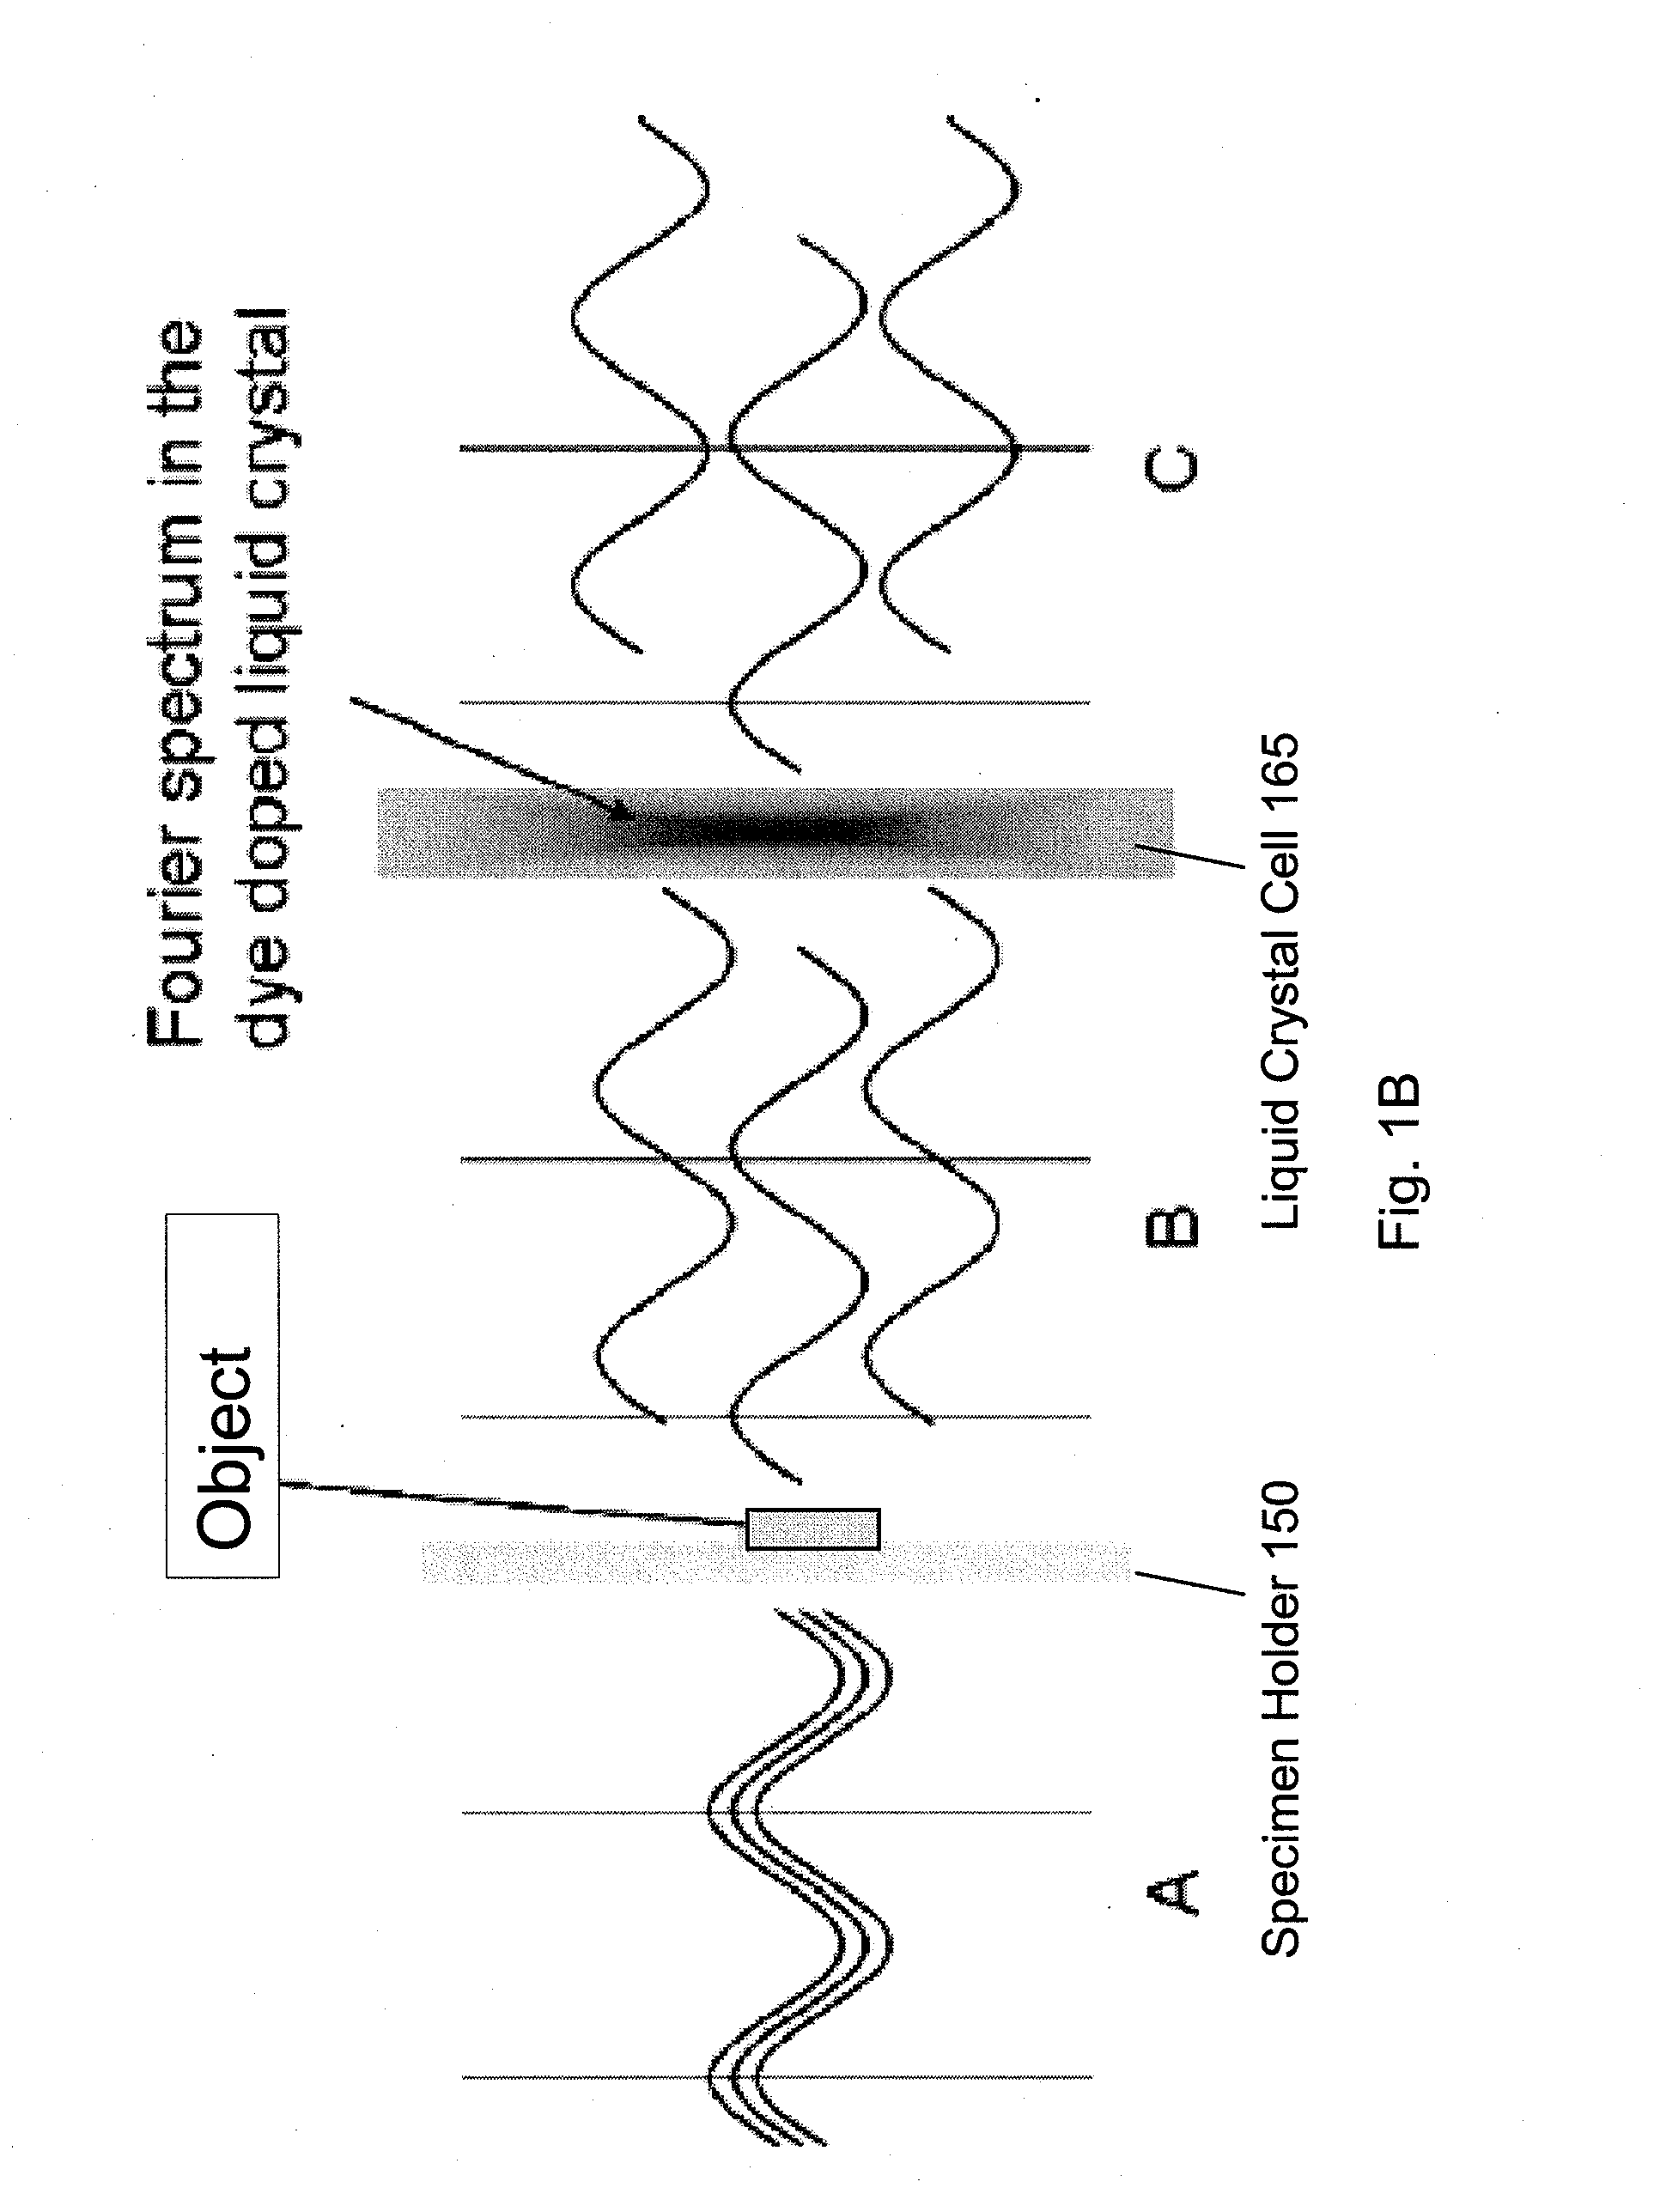 Systems and Methods of All-Optical Fourier Phase Contrast Imaging Using Dye Doped Liquid Crystals